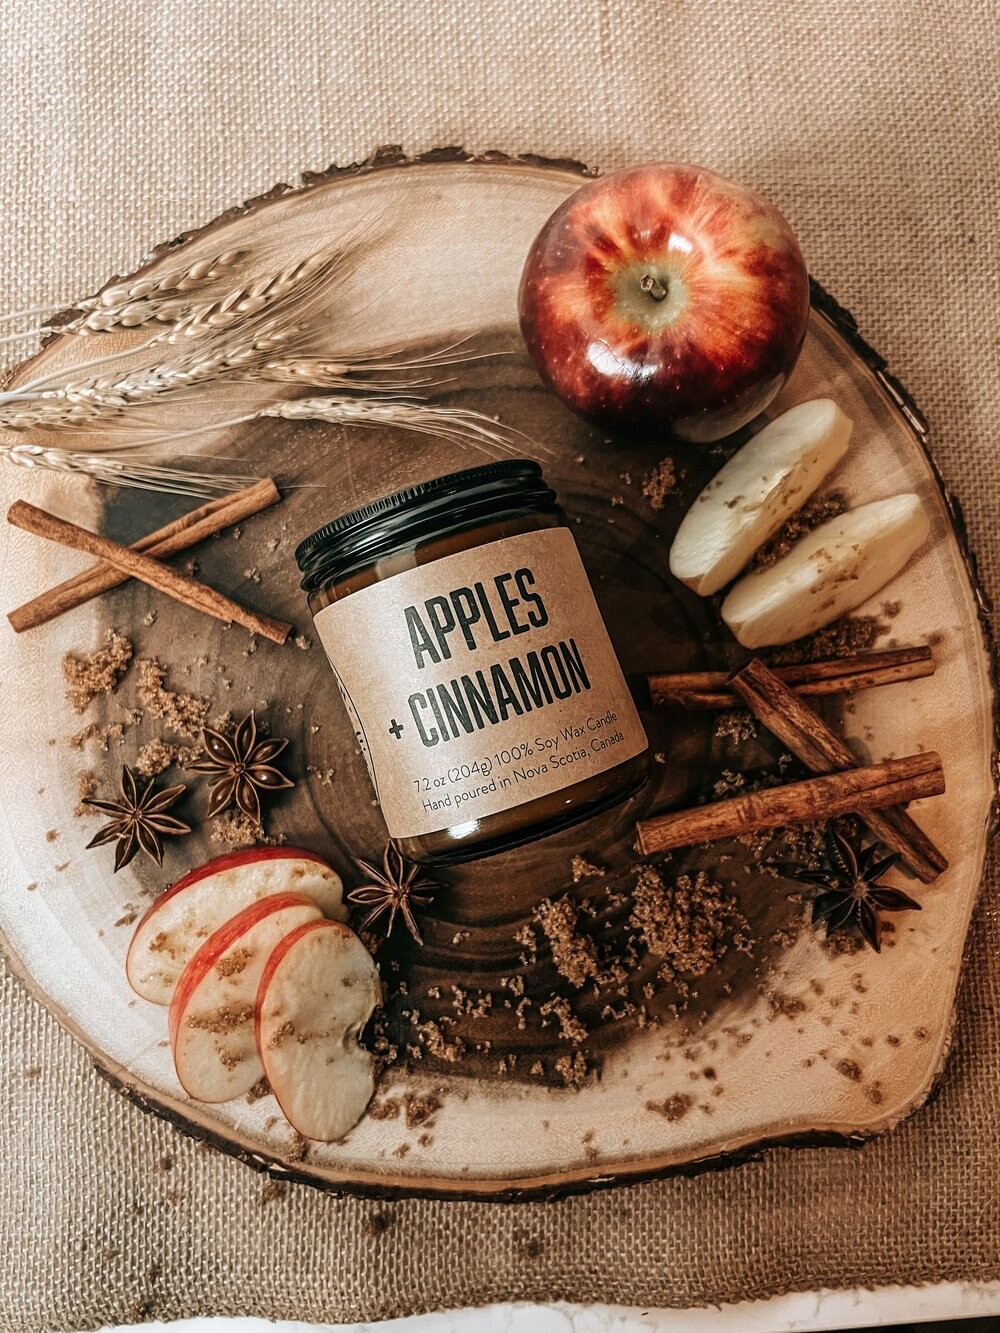 Apples and Cinnamon - Lawrencetown Candle Co